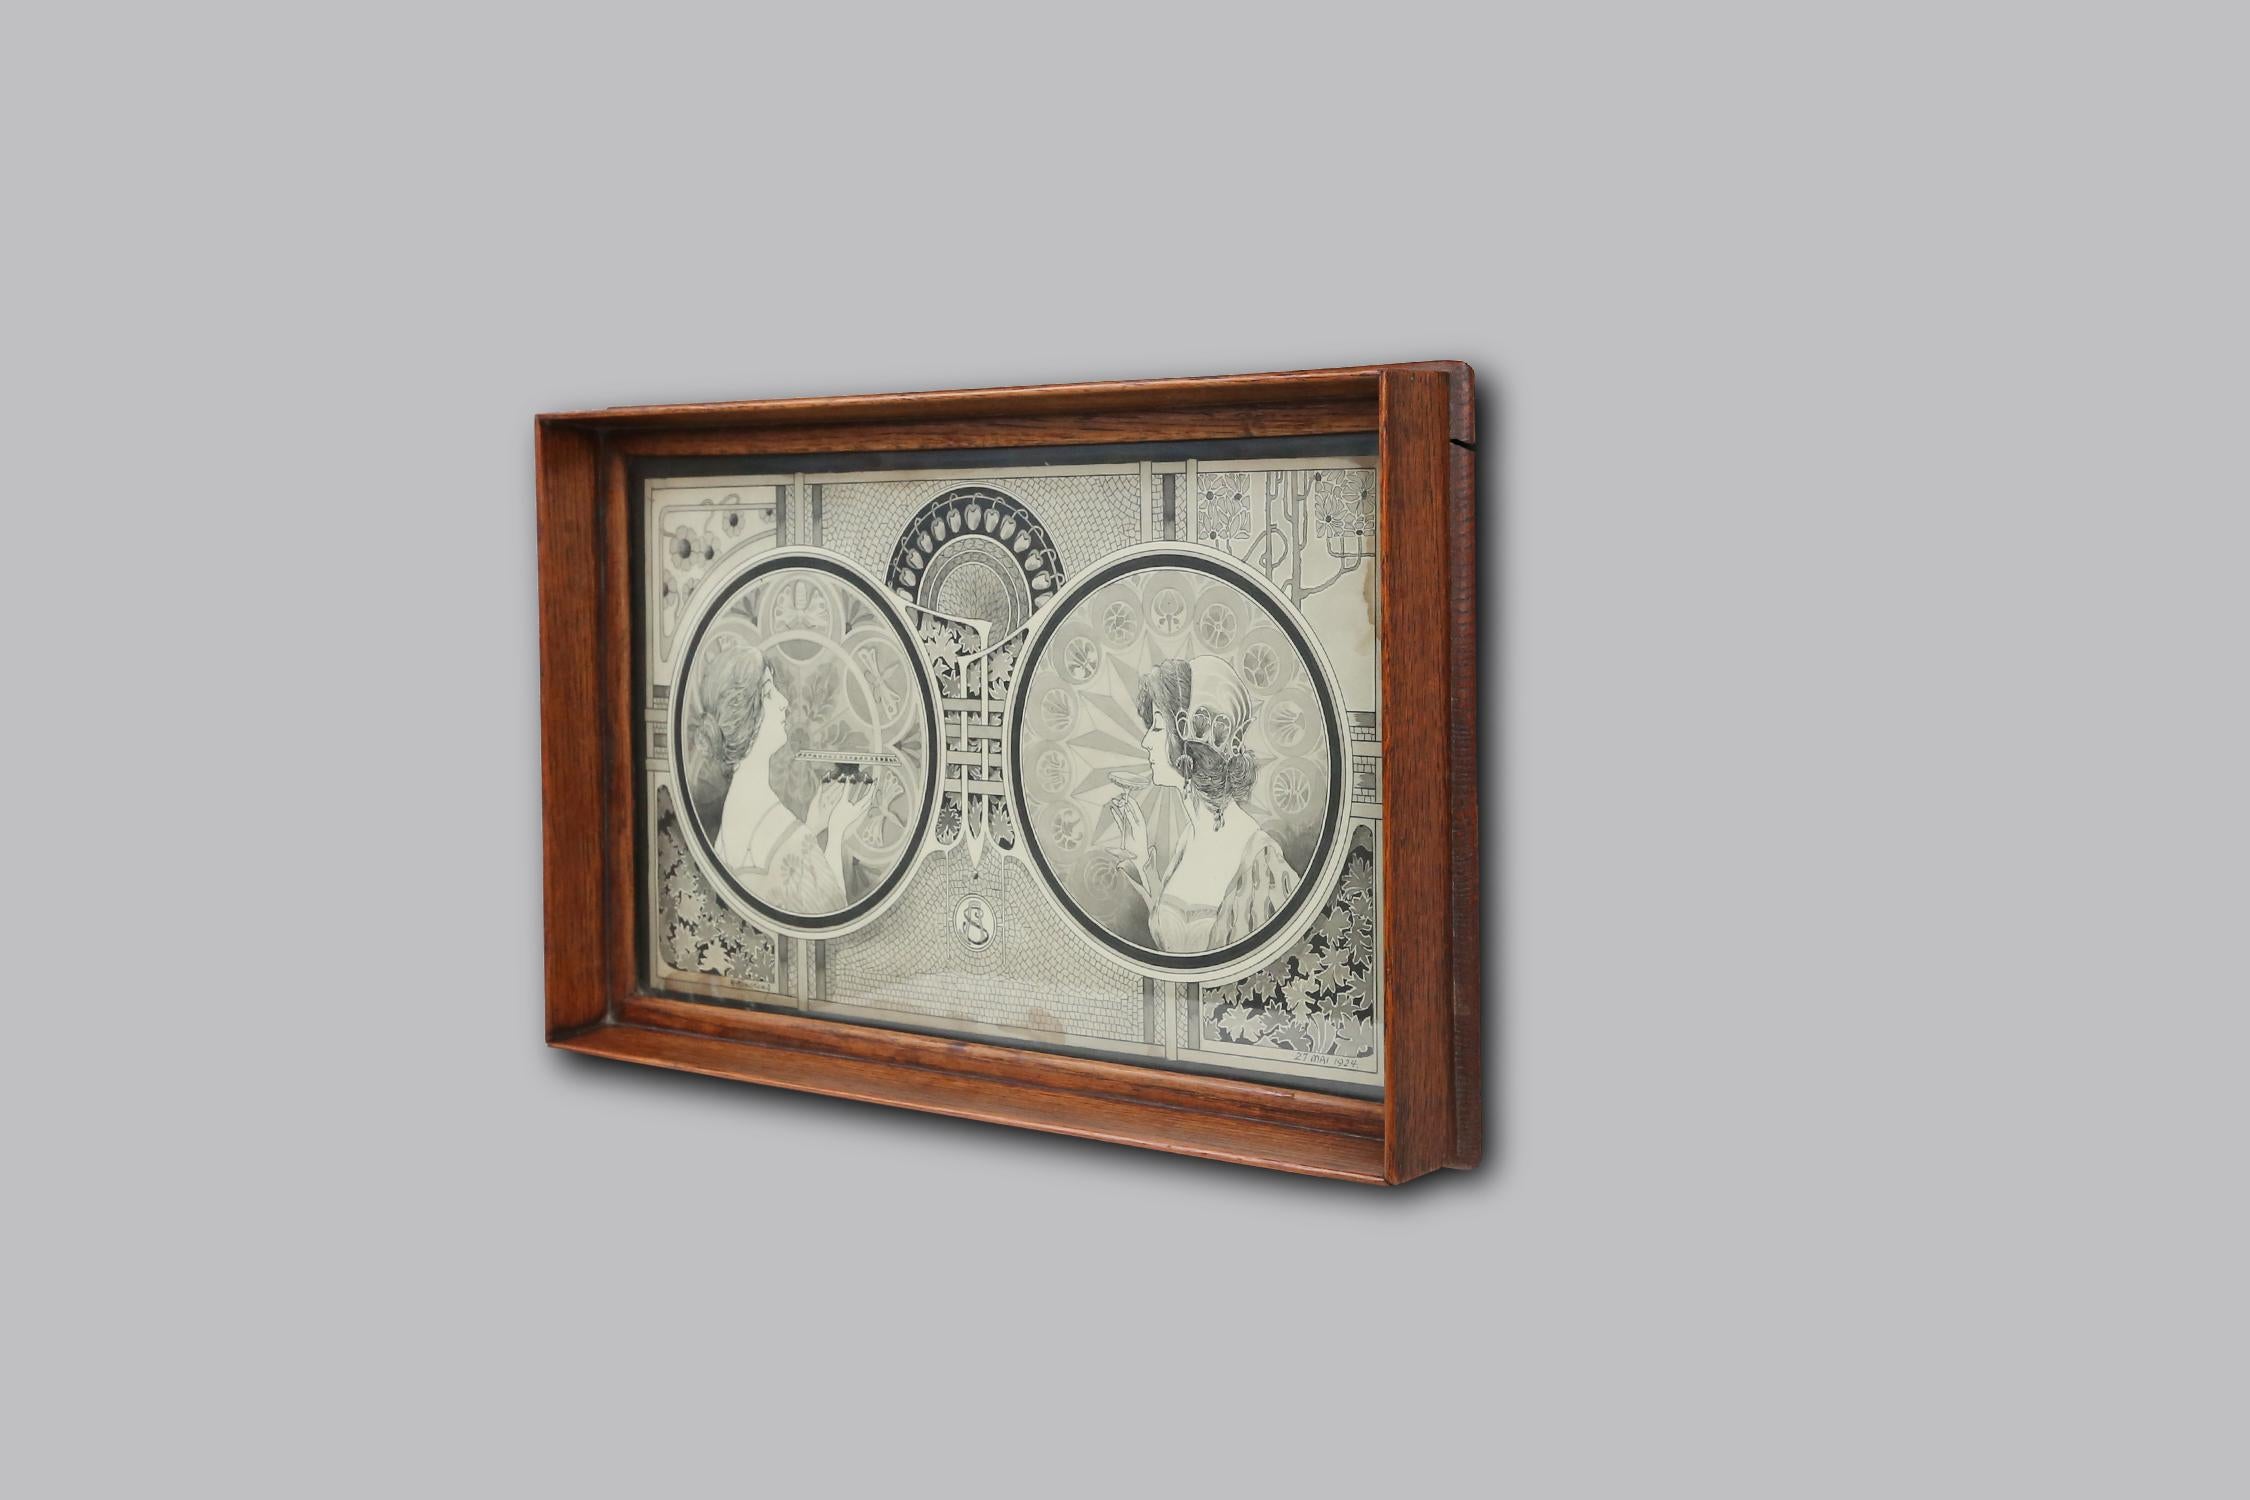 A unique and stylish serving tray for the home, that is this wooden serving tray with an art nouveau poster behind glass. This serving tray is made of high-quality wood and has a beautiful image of an art nouveau artwork behind glass. The poster is